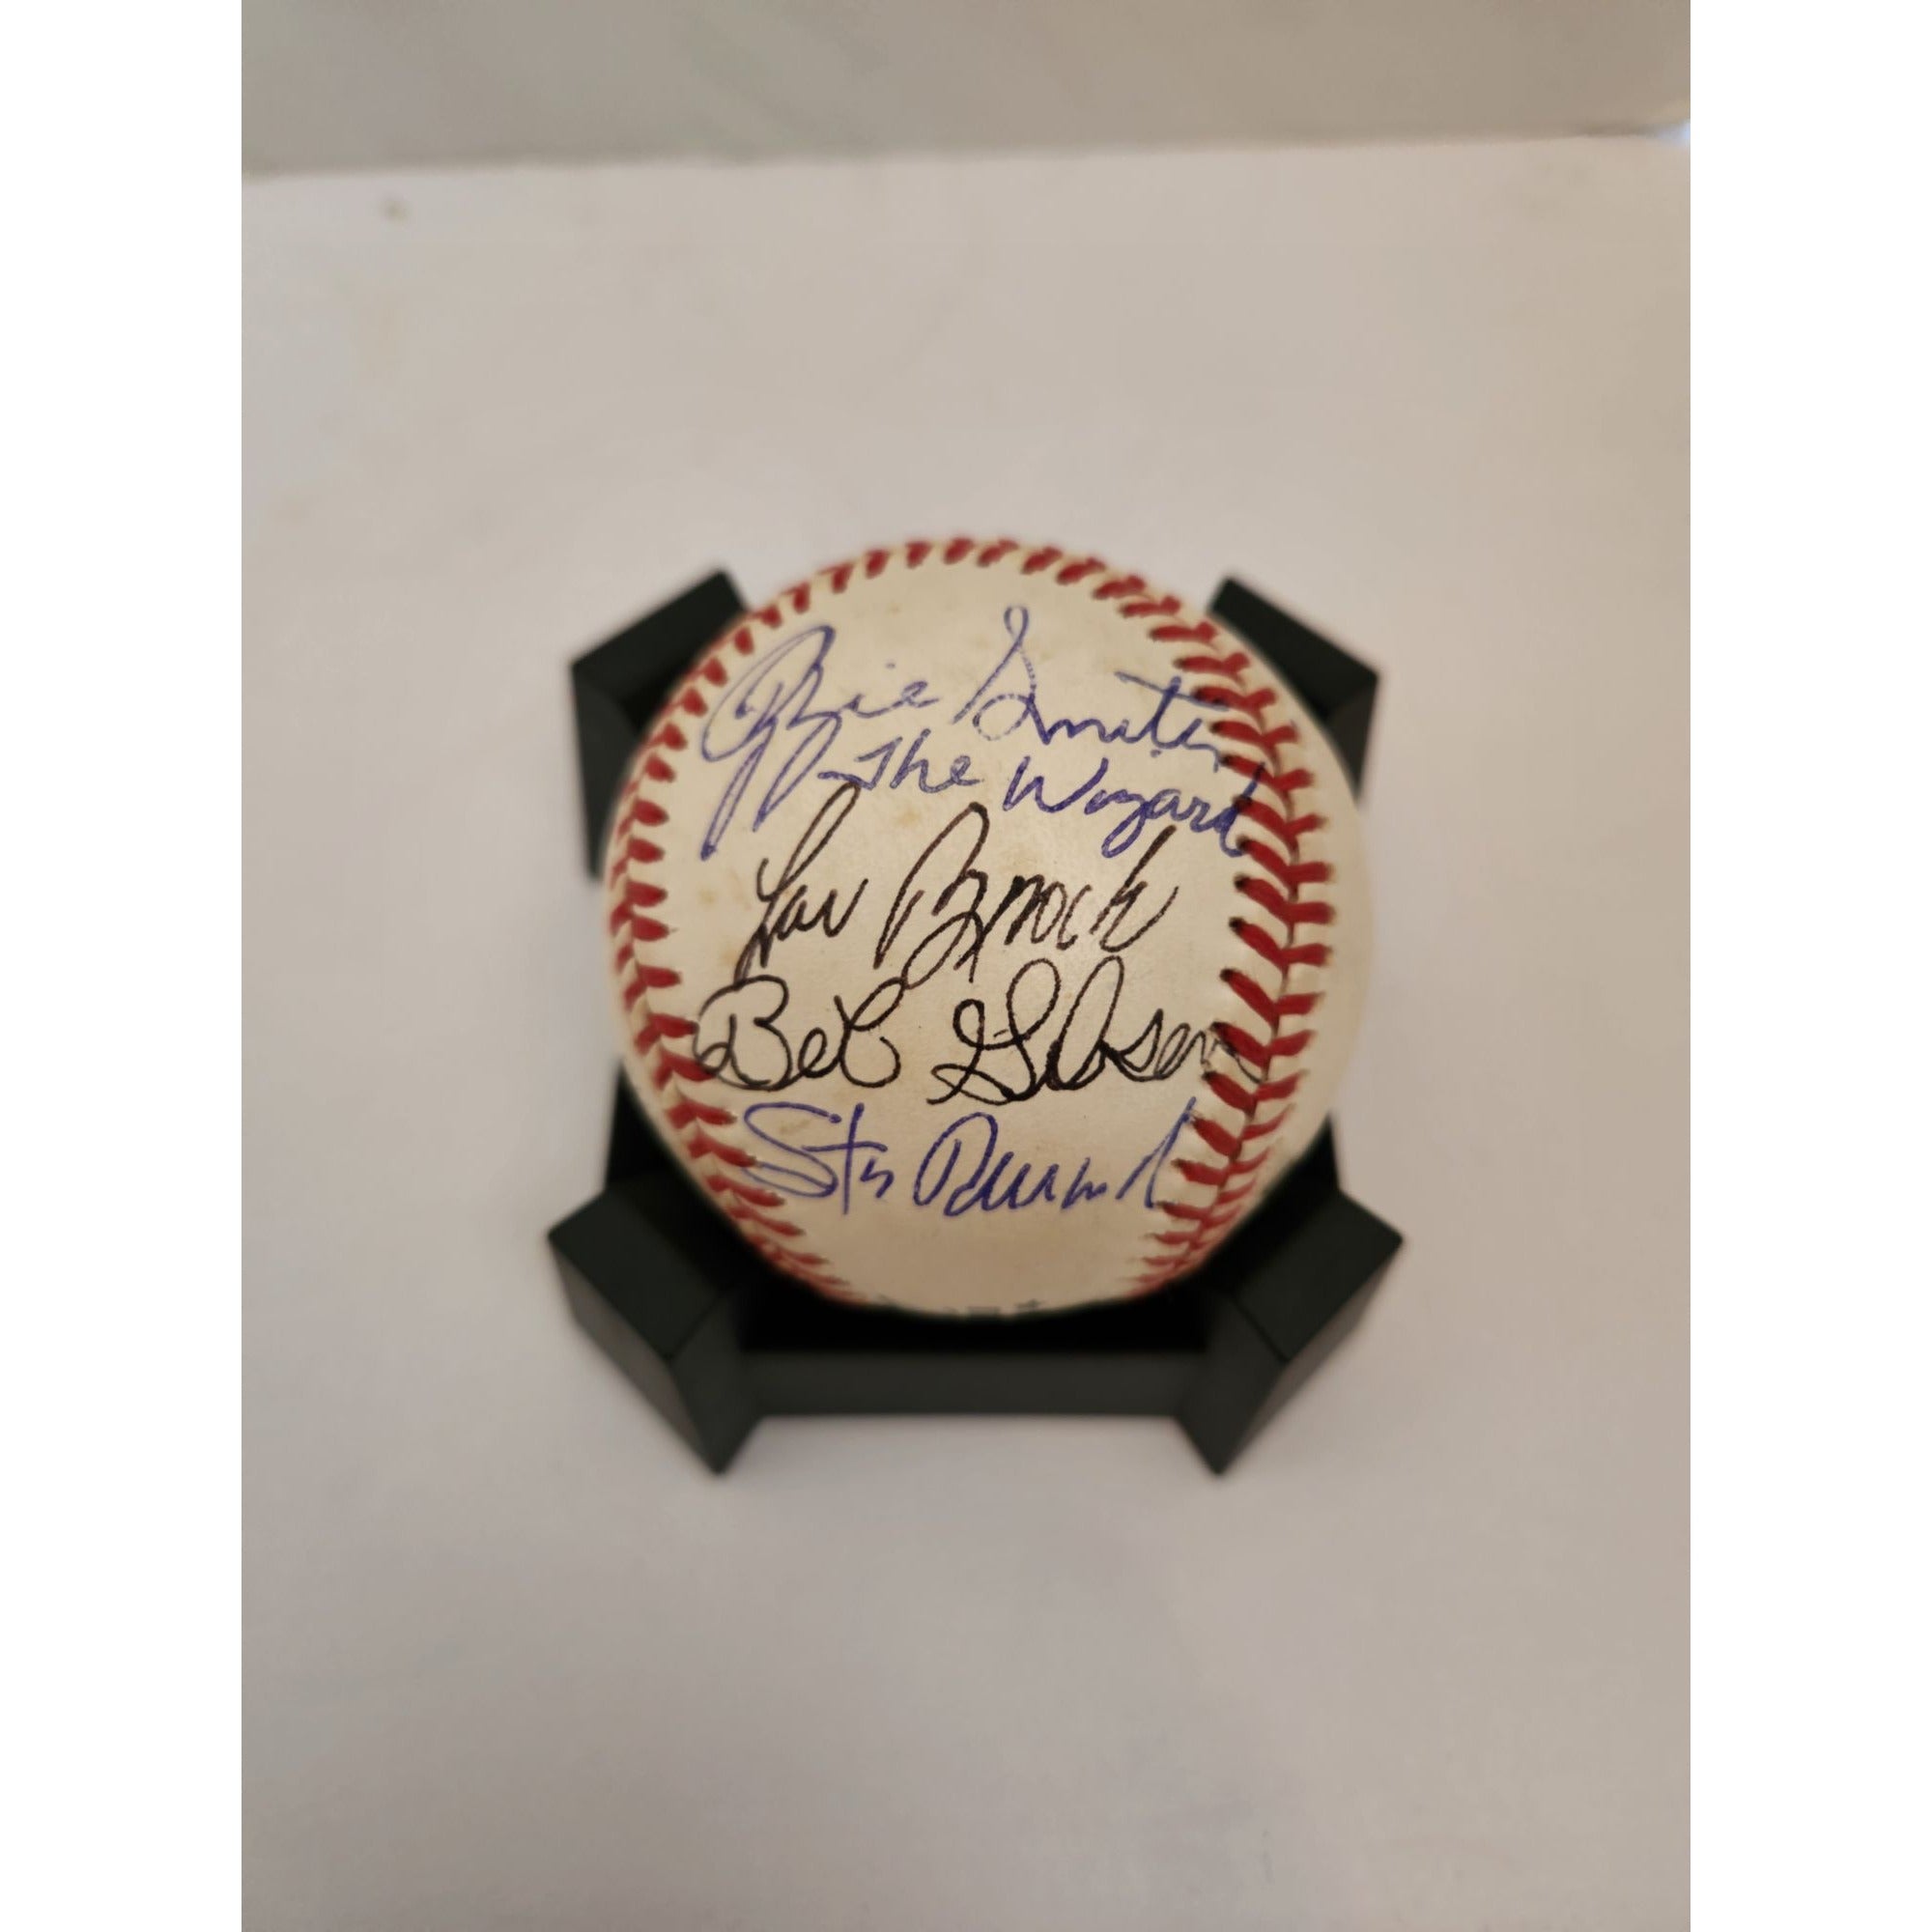 Ozzie Smith Lou Brock Bob Gibson Stan Mutual official Rawlings MLB baseball signed with proof free acrylic display case